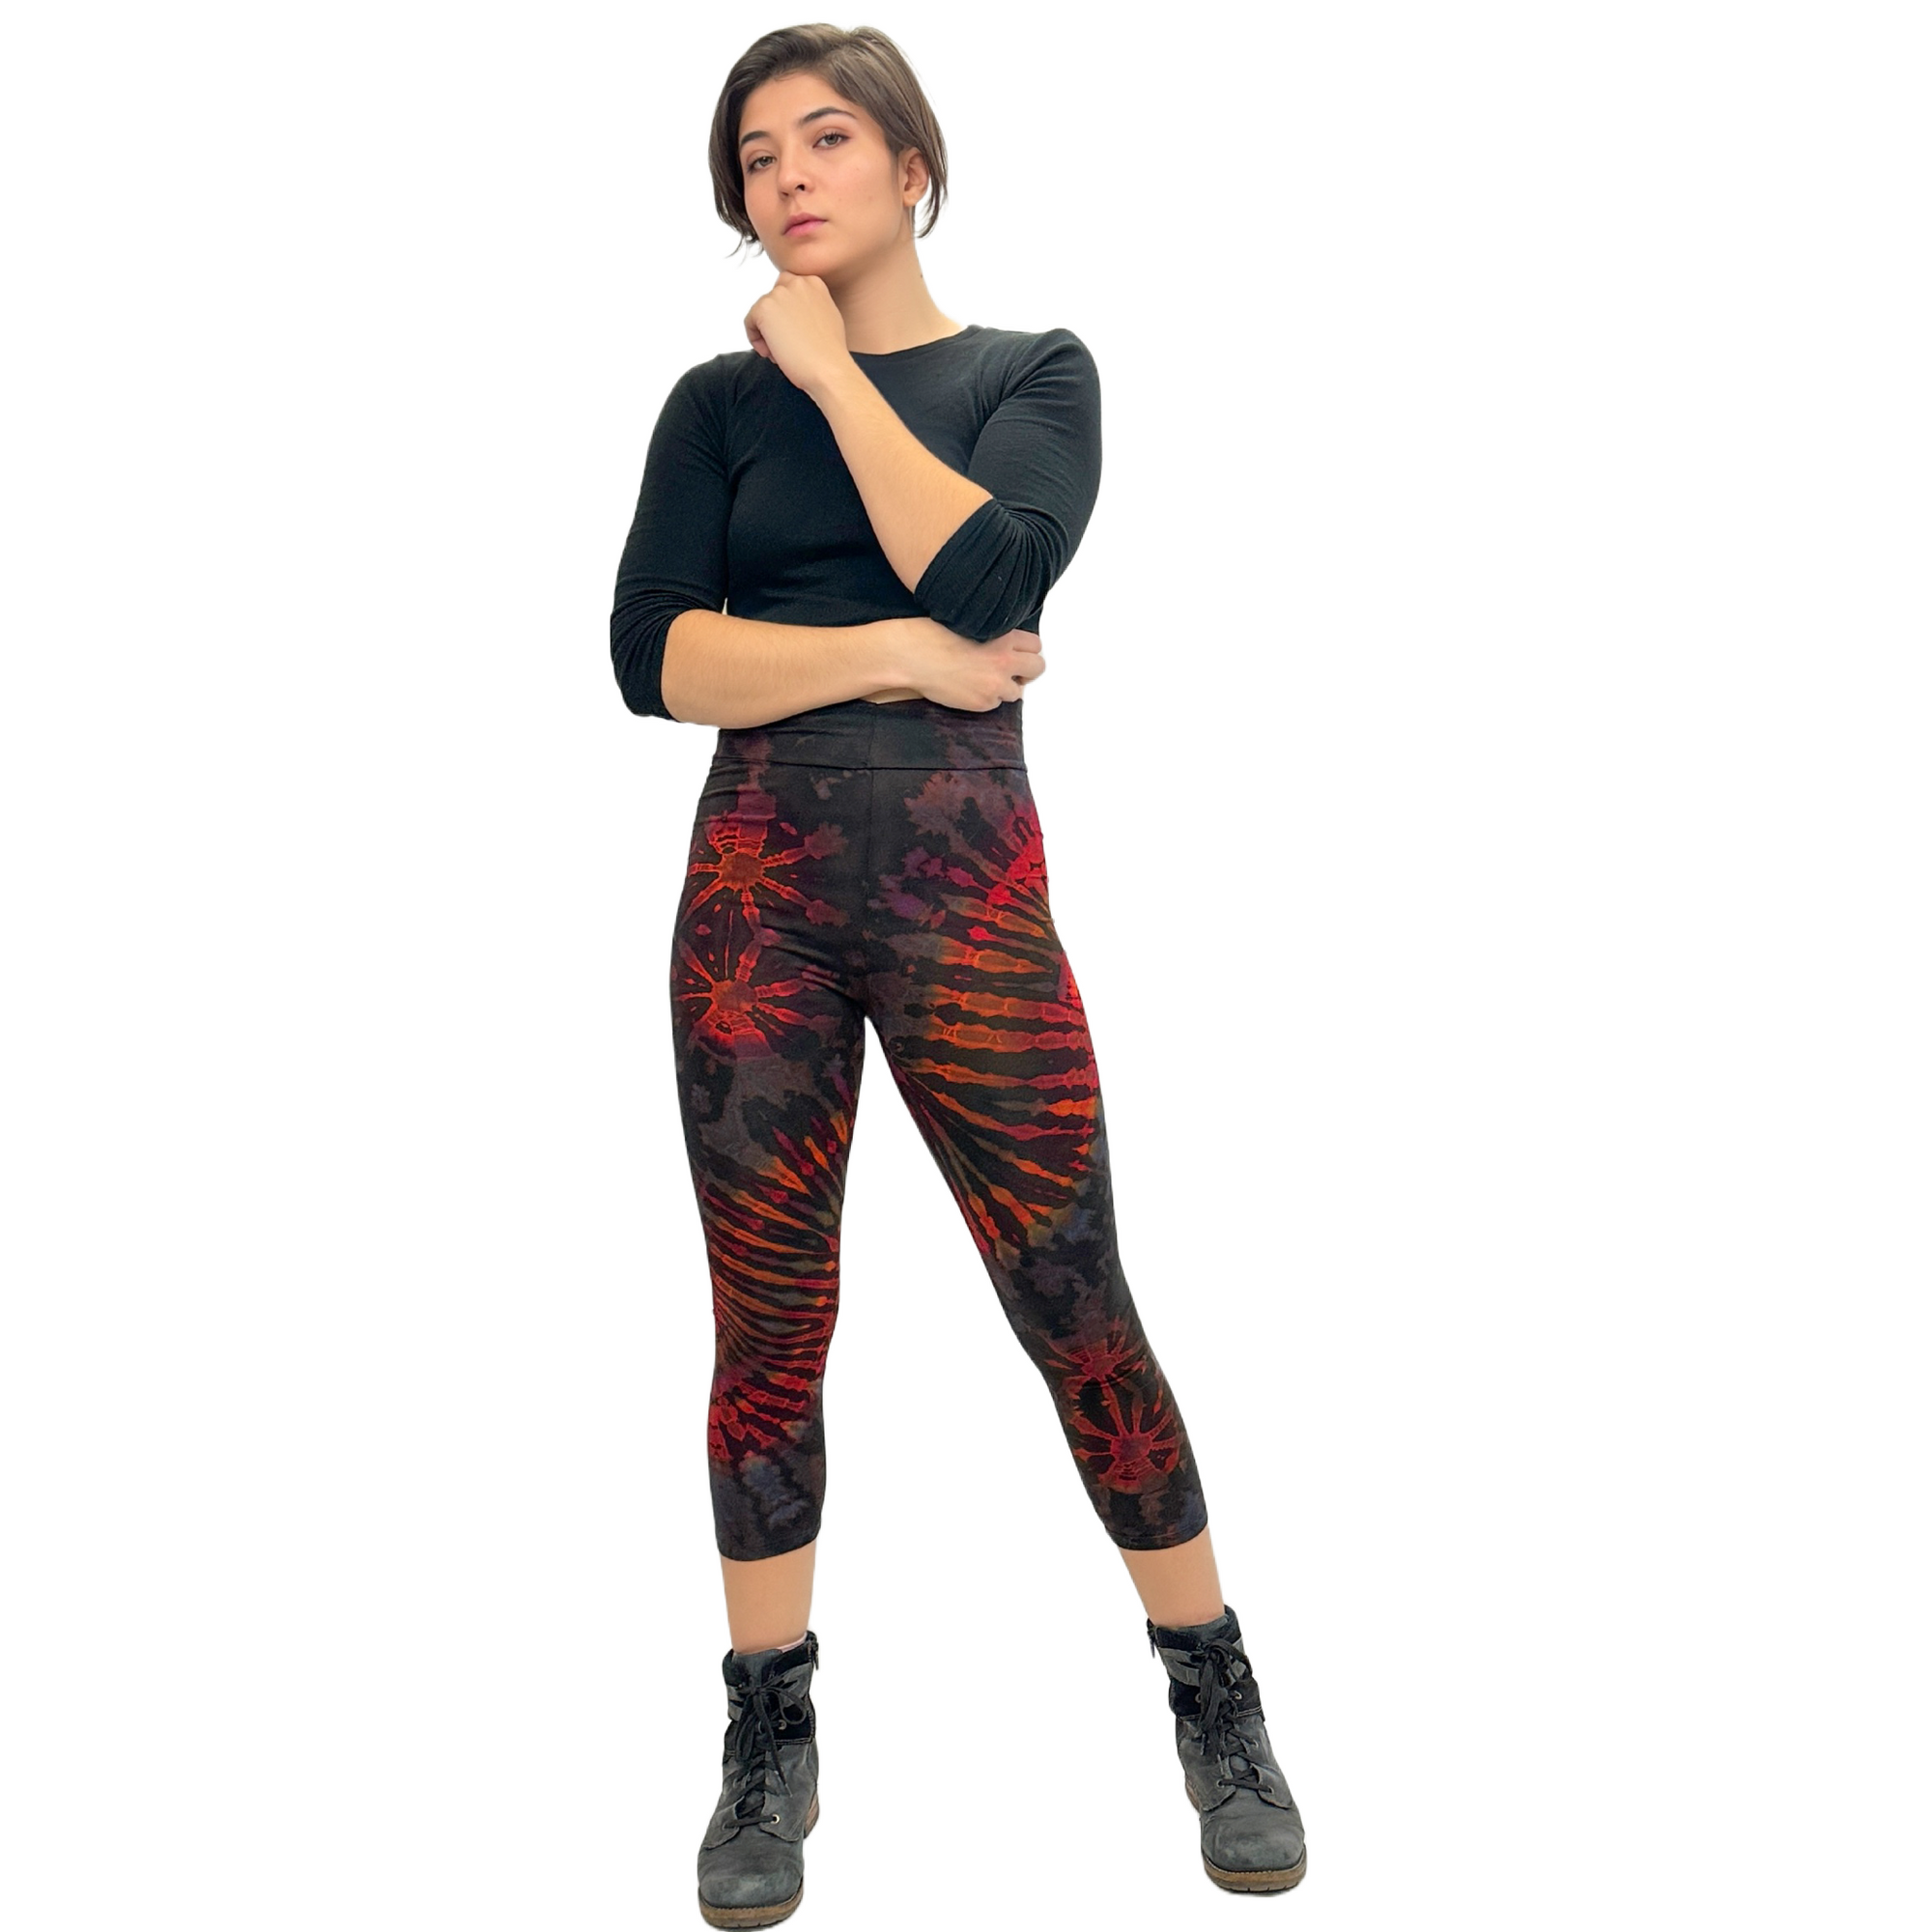 Yoga Style Banded Lined Tie Dye Printed Knit Capri Legging With